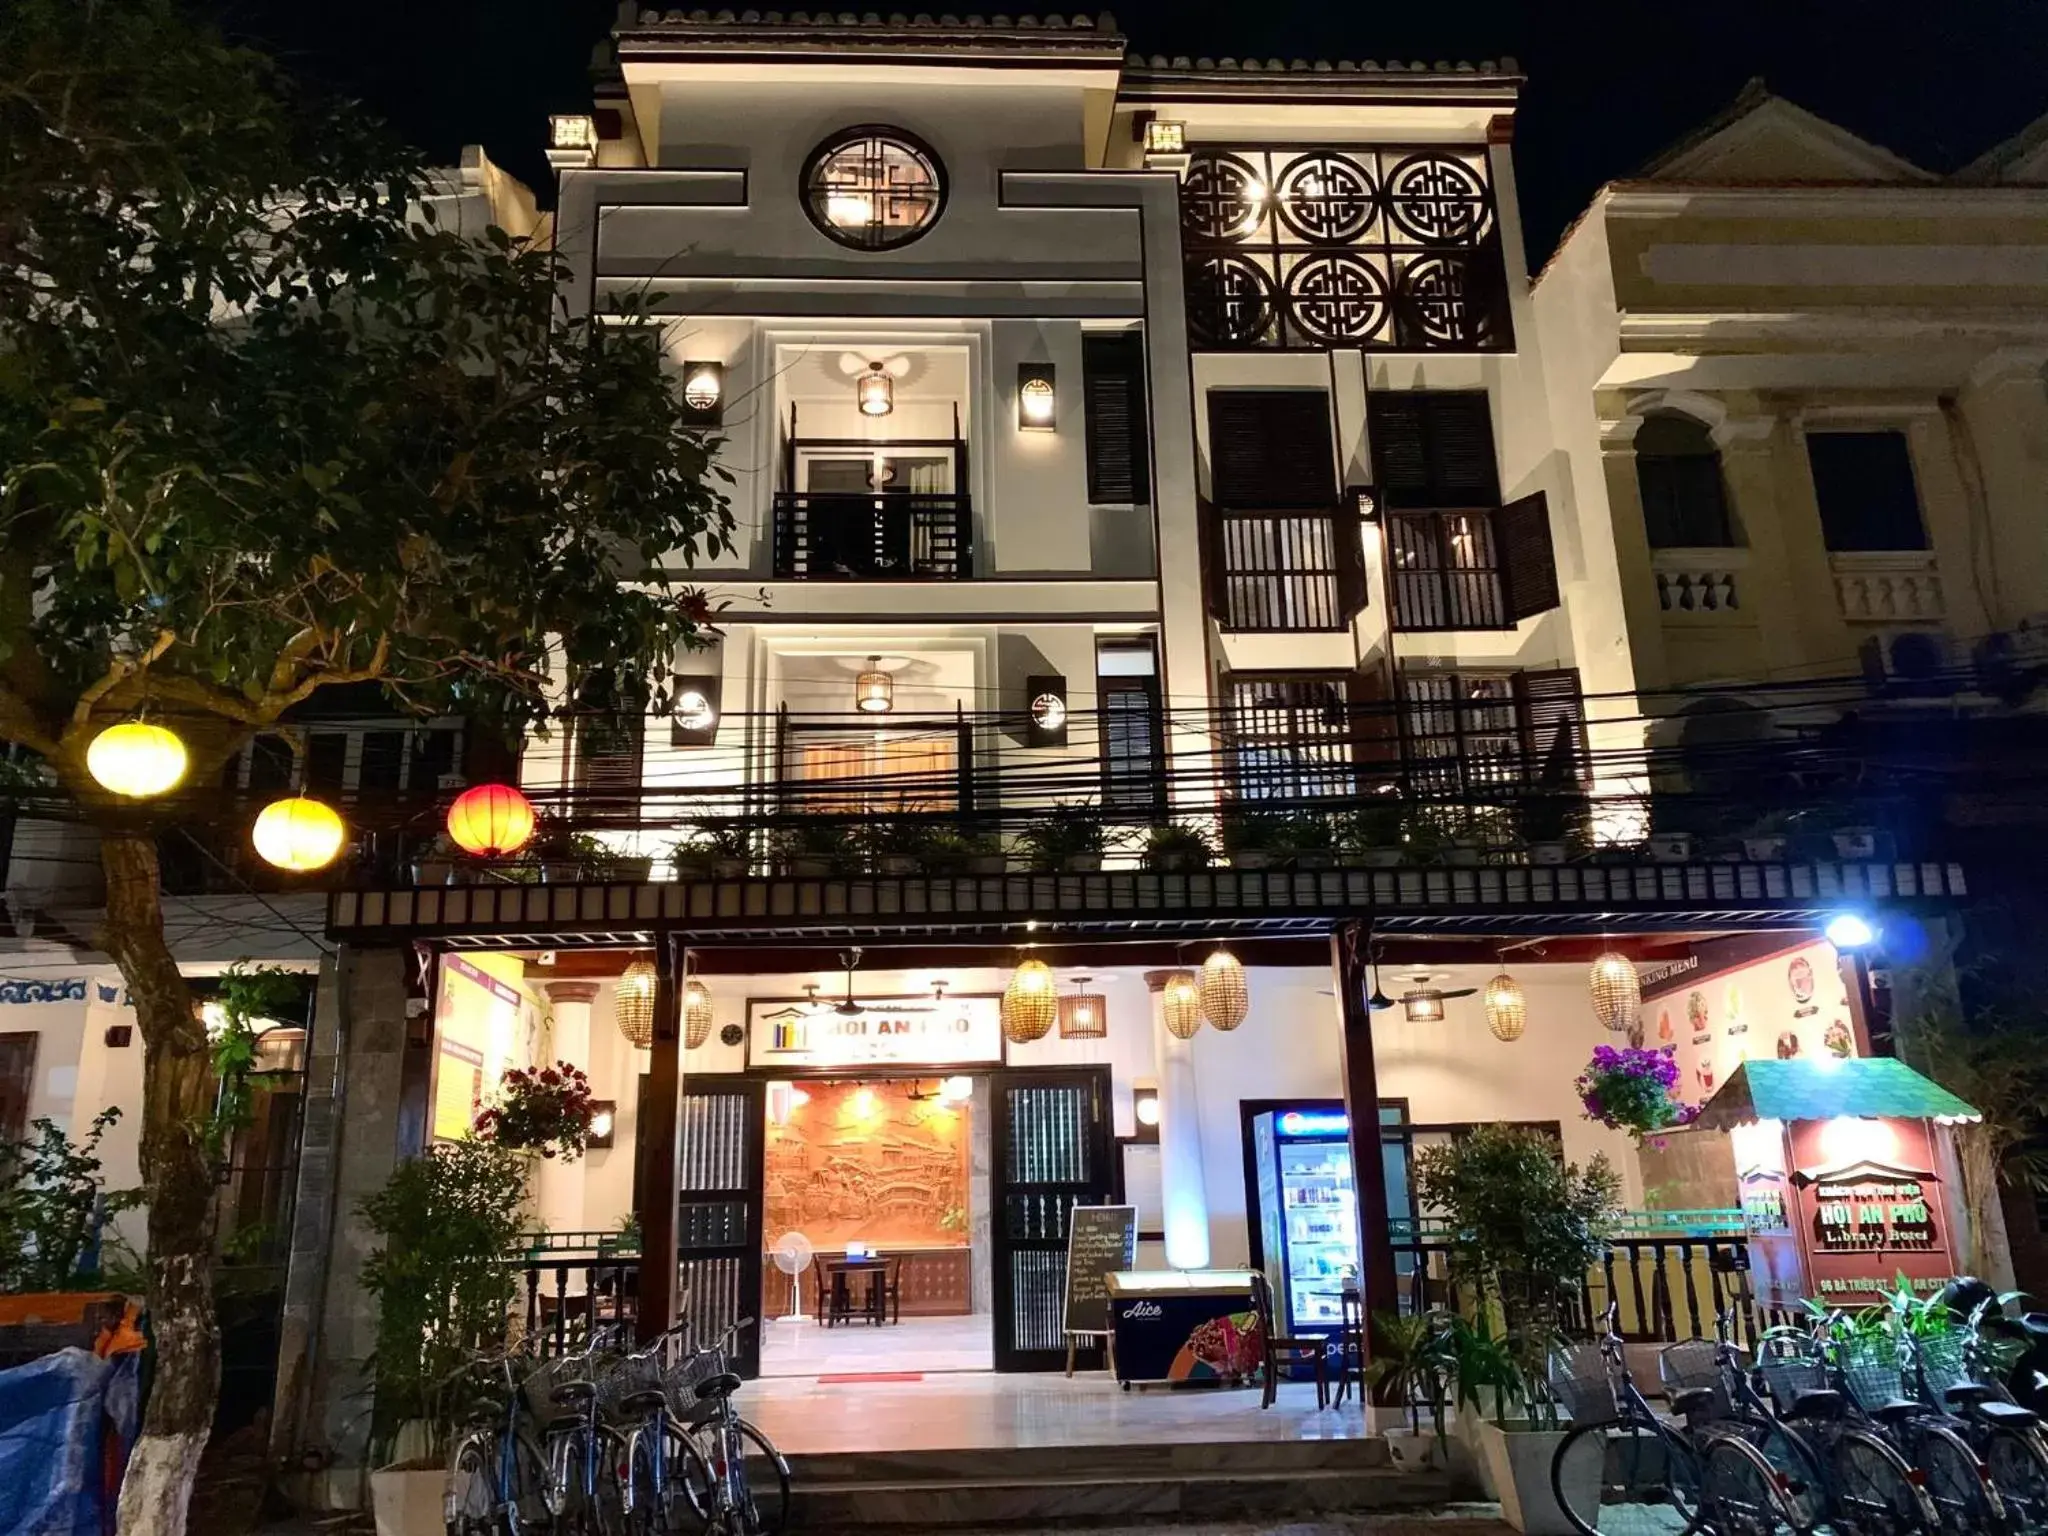 Property Building in Hoi An Pho Library Hotel